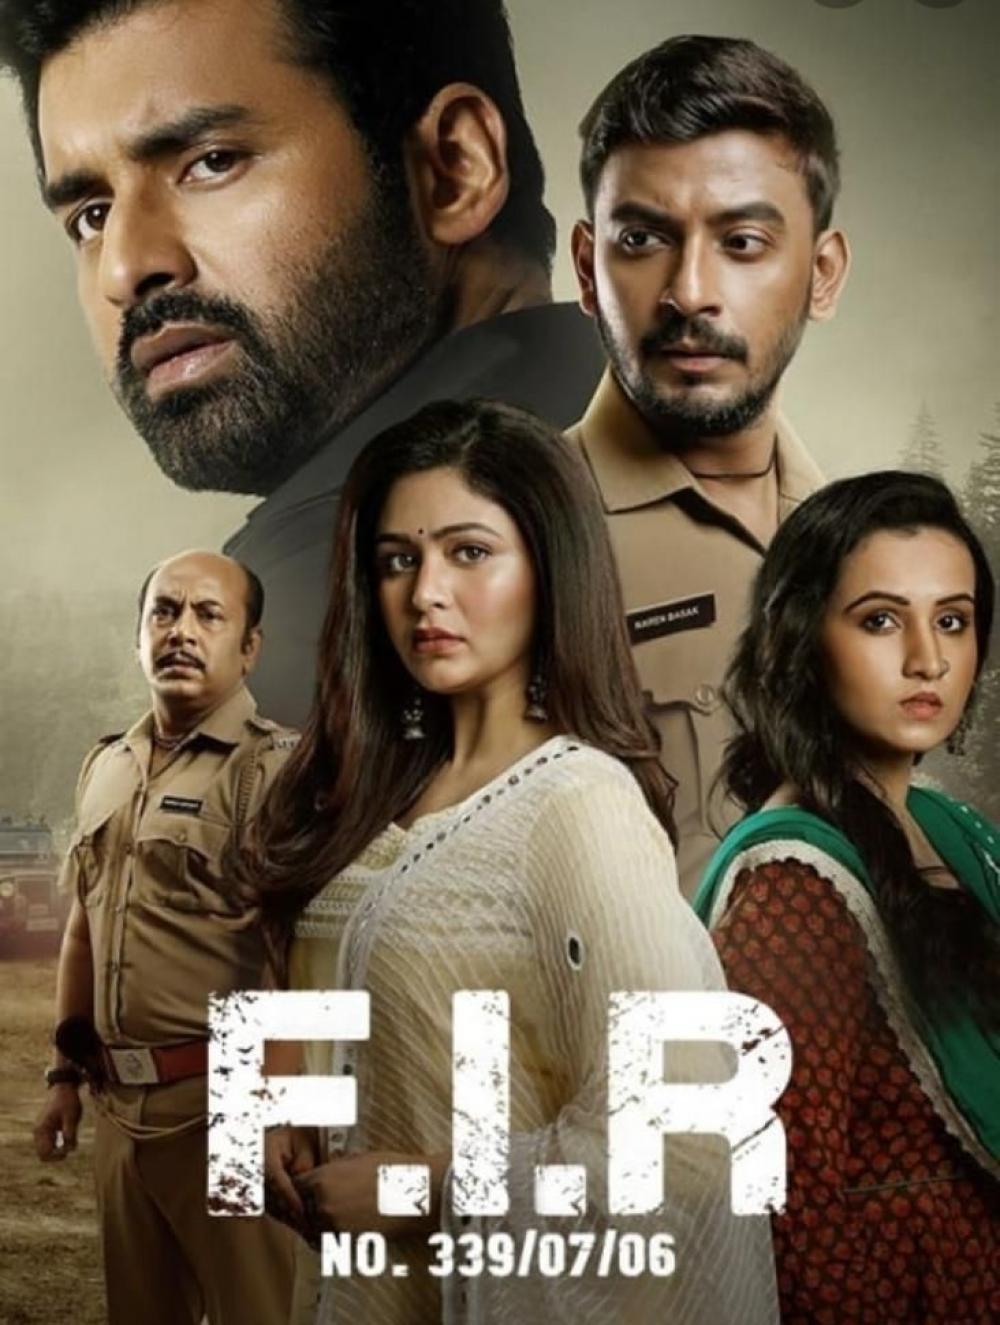 The Weekend Leader - Bengali thriller 'F.I.R. No. 339/07/06' set to release on OTT